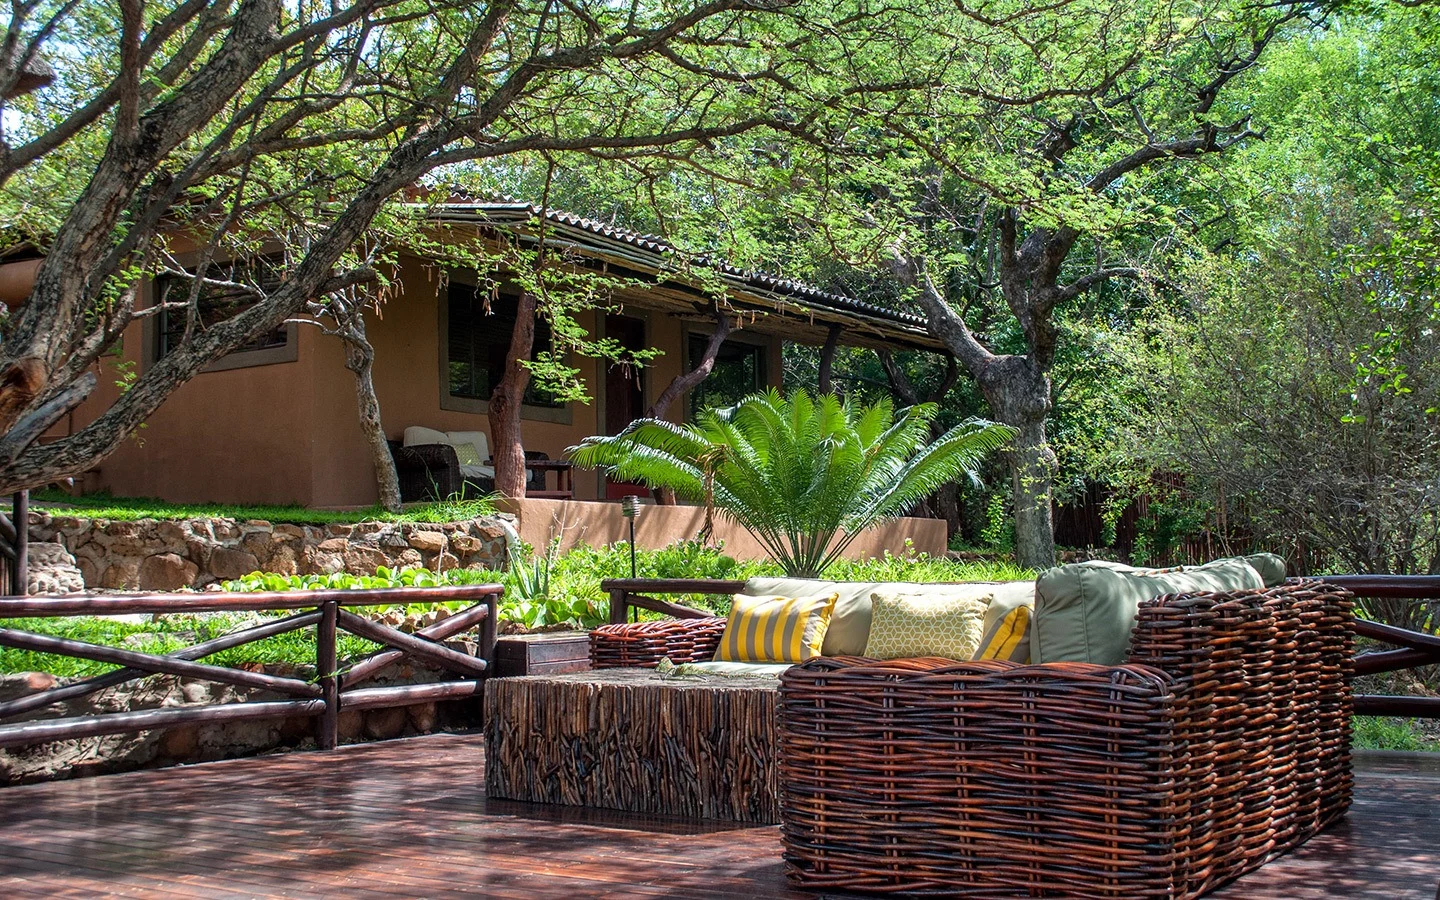 Naledi Game Lodge in the Kruger, South Africa